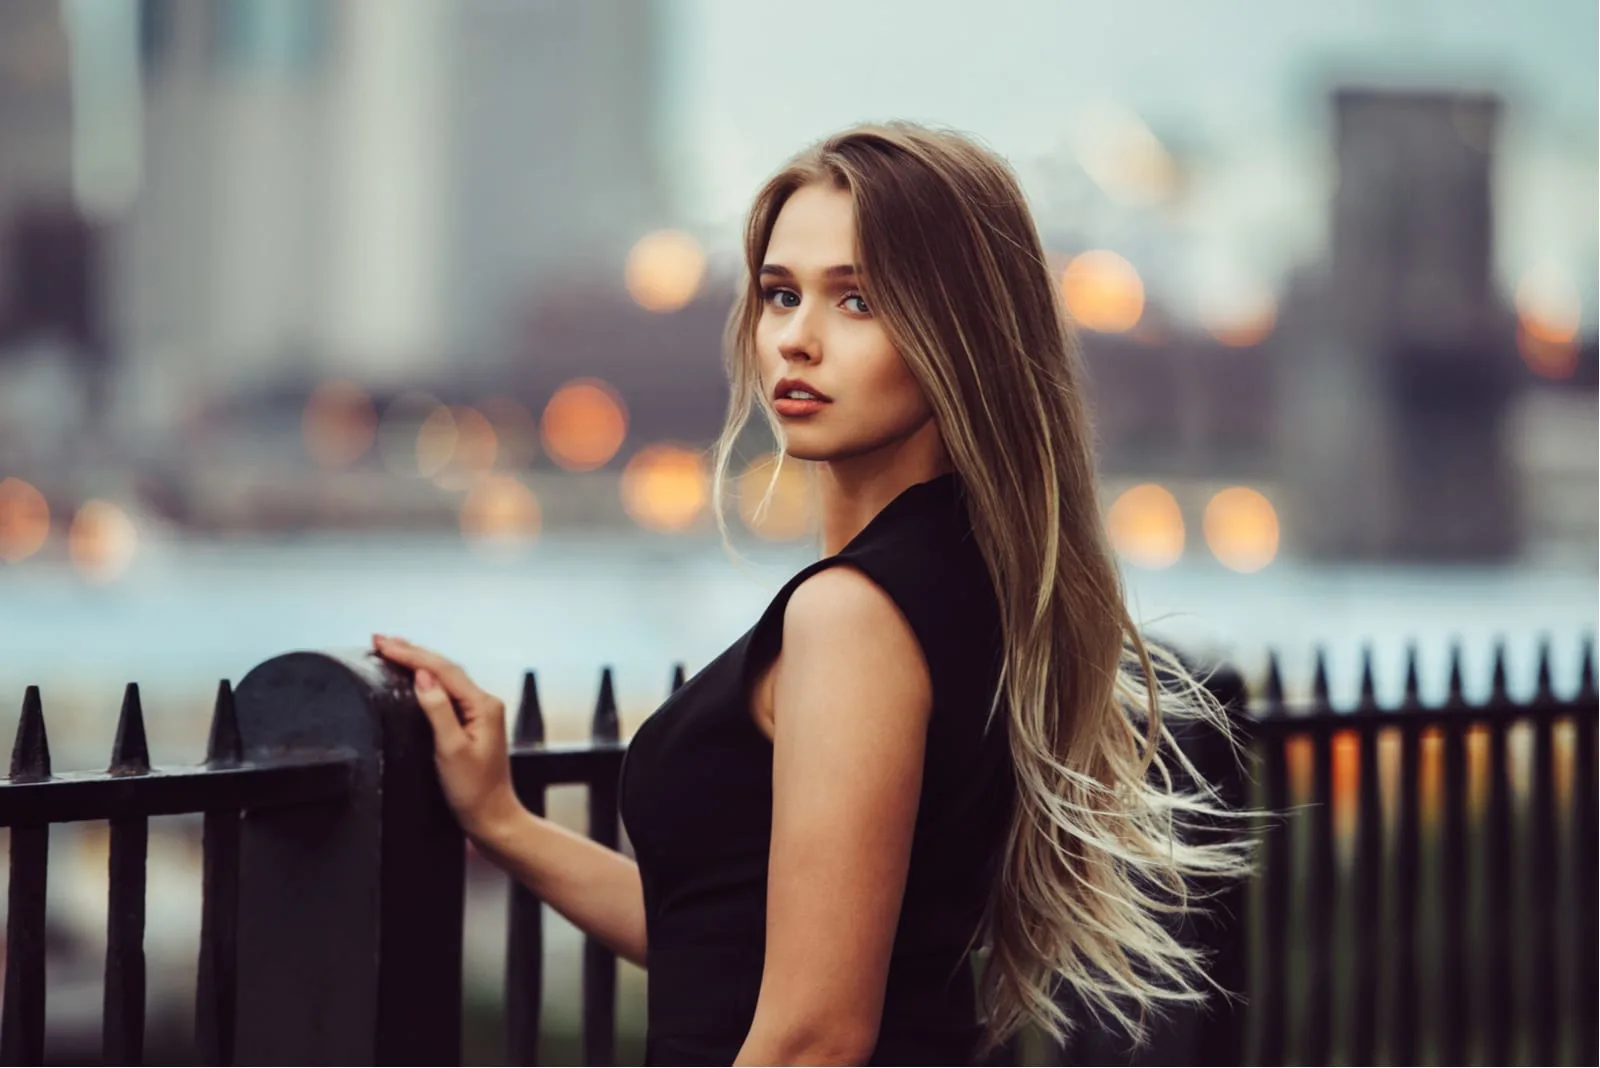 woman with perfect blonde hair posing in city